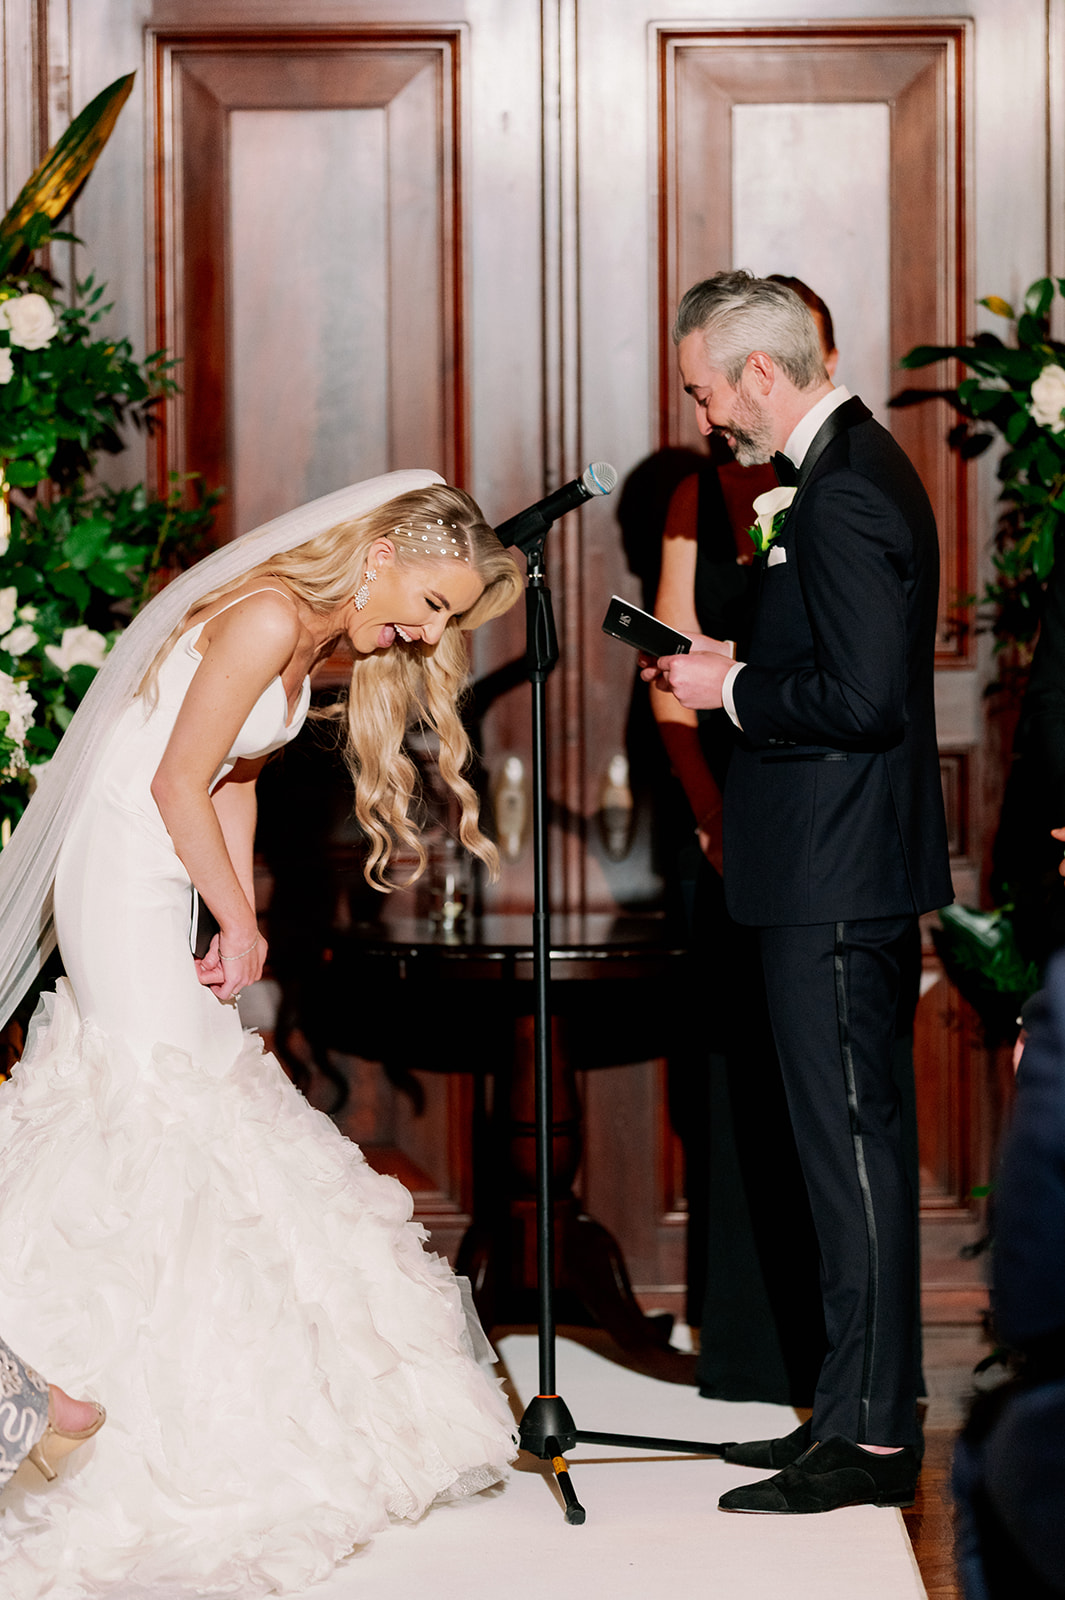 Candid moment of bride and groom laughing during their wedding ceremony at Bourne Mansion.